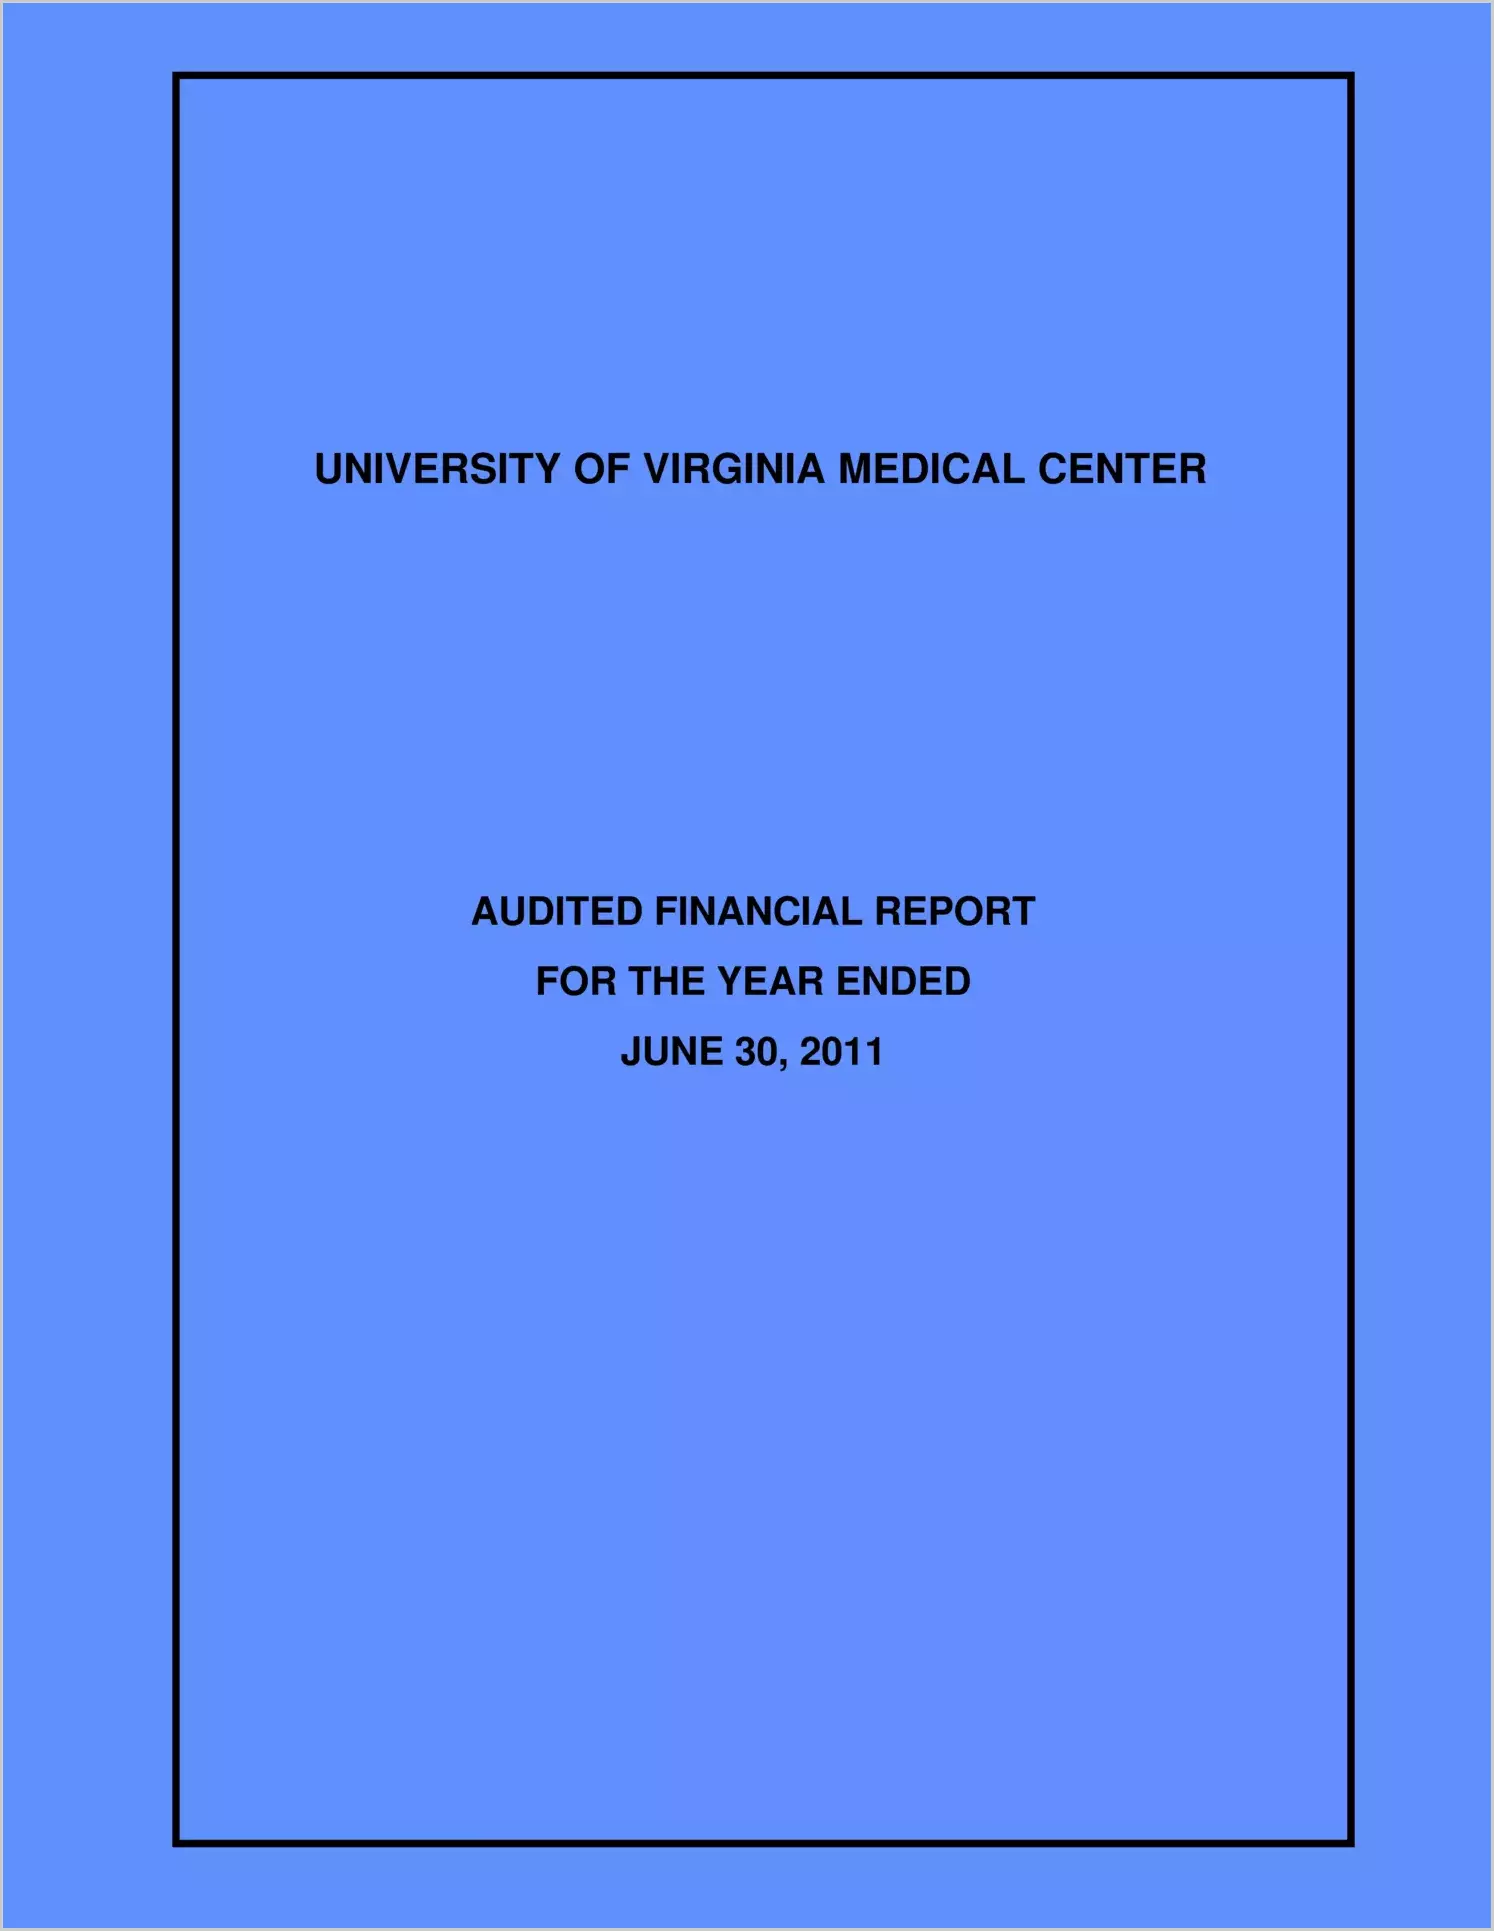 University of Virginia Medical Center Finanical Report for the year ended June 30, 2011